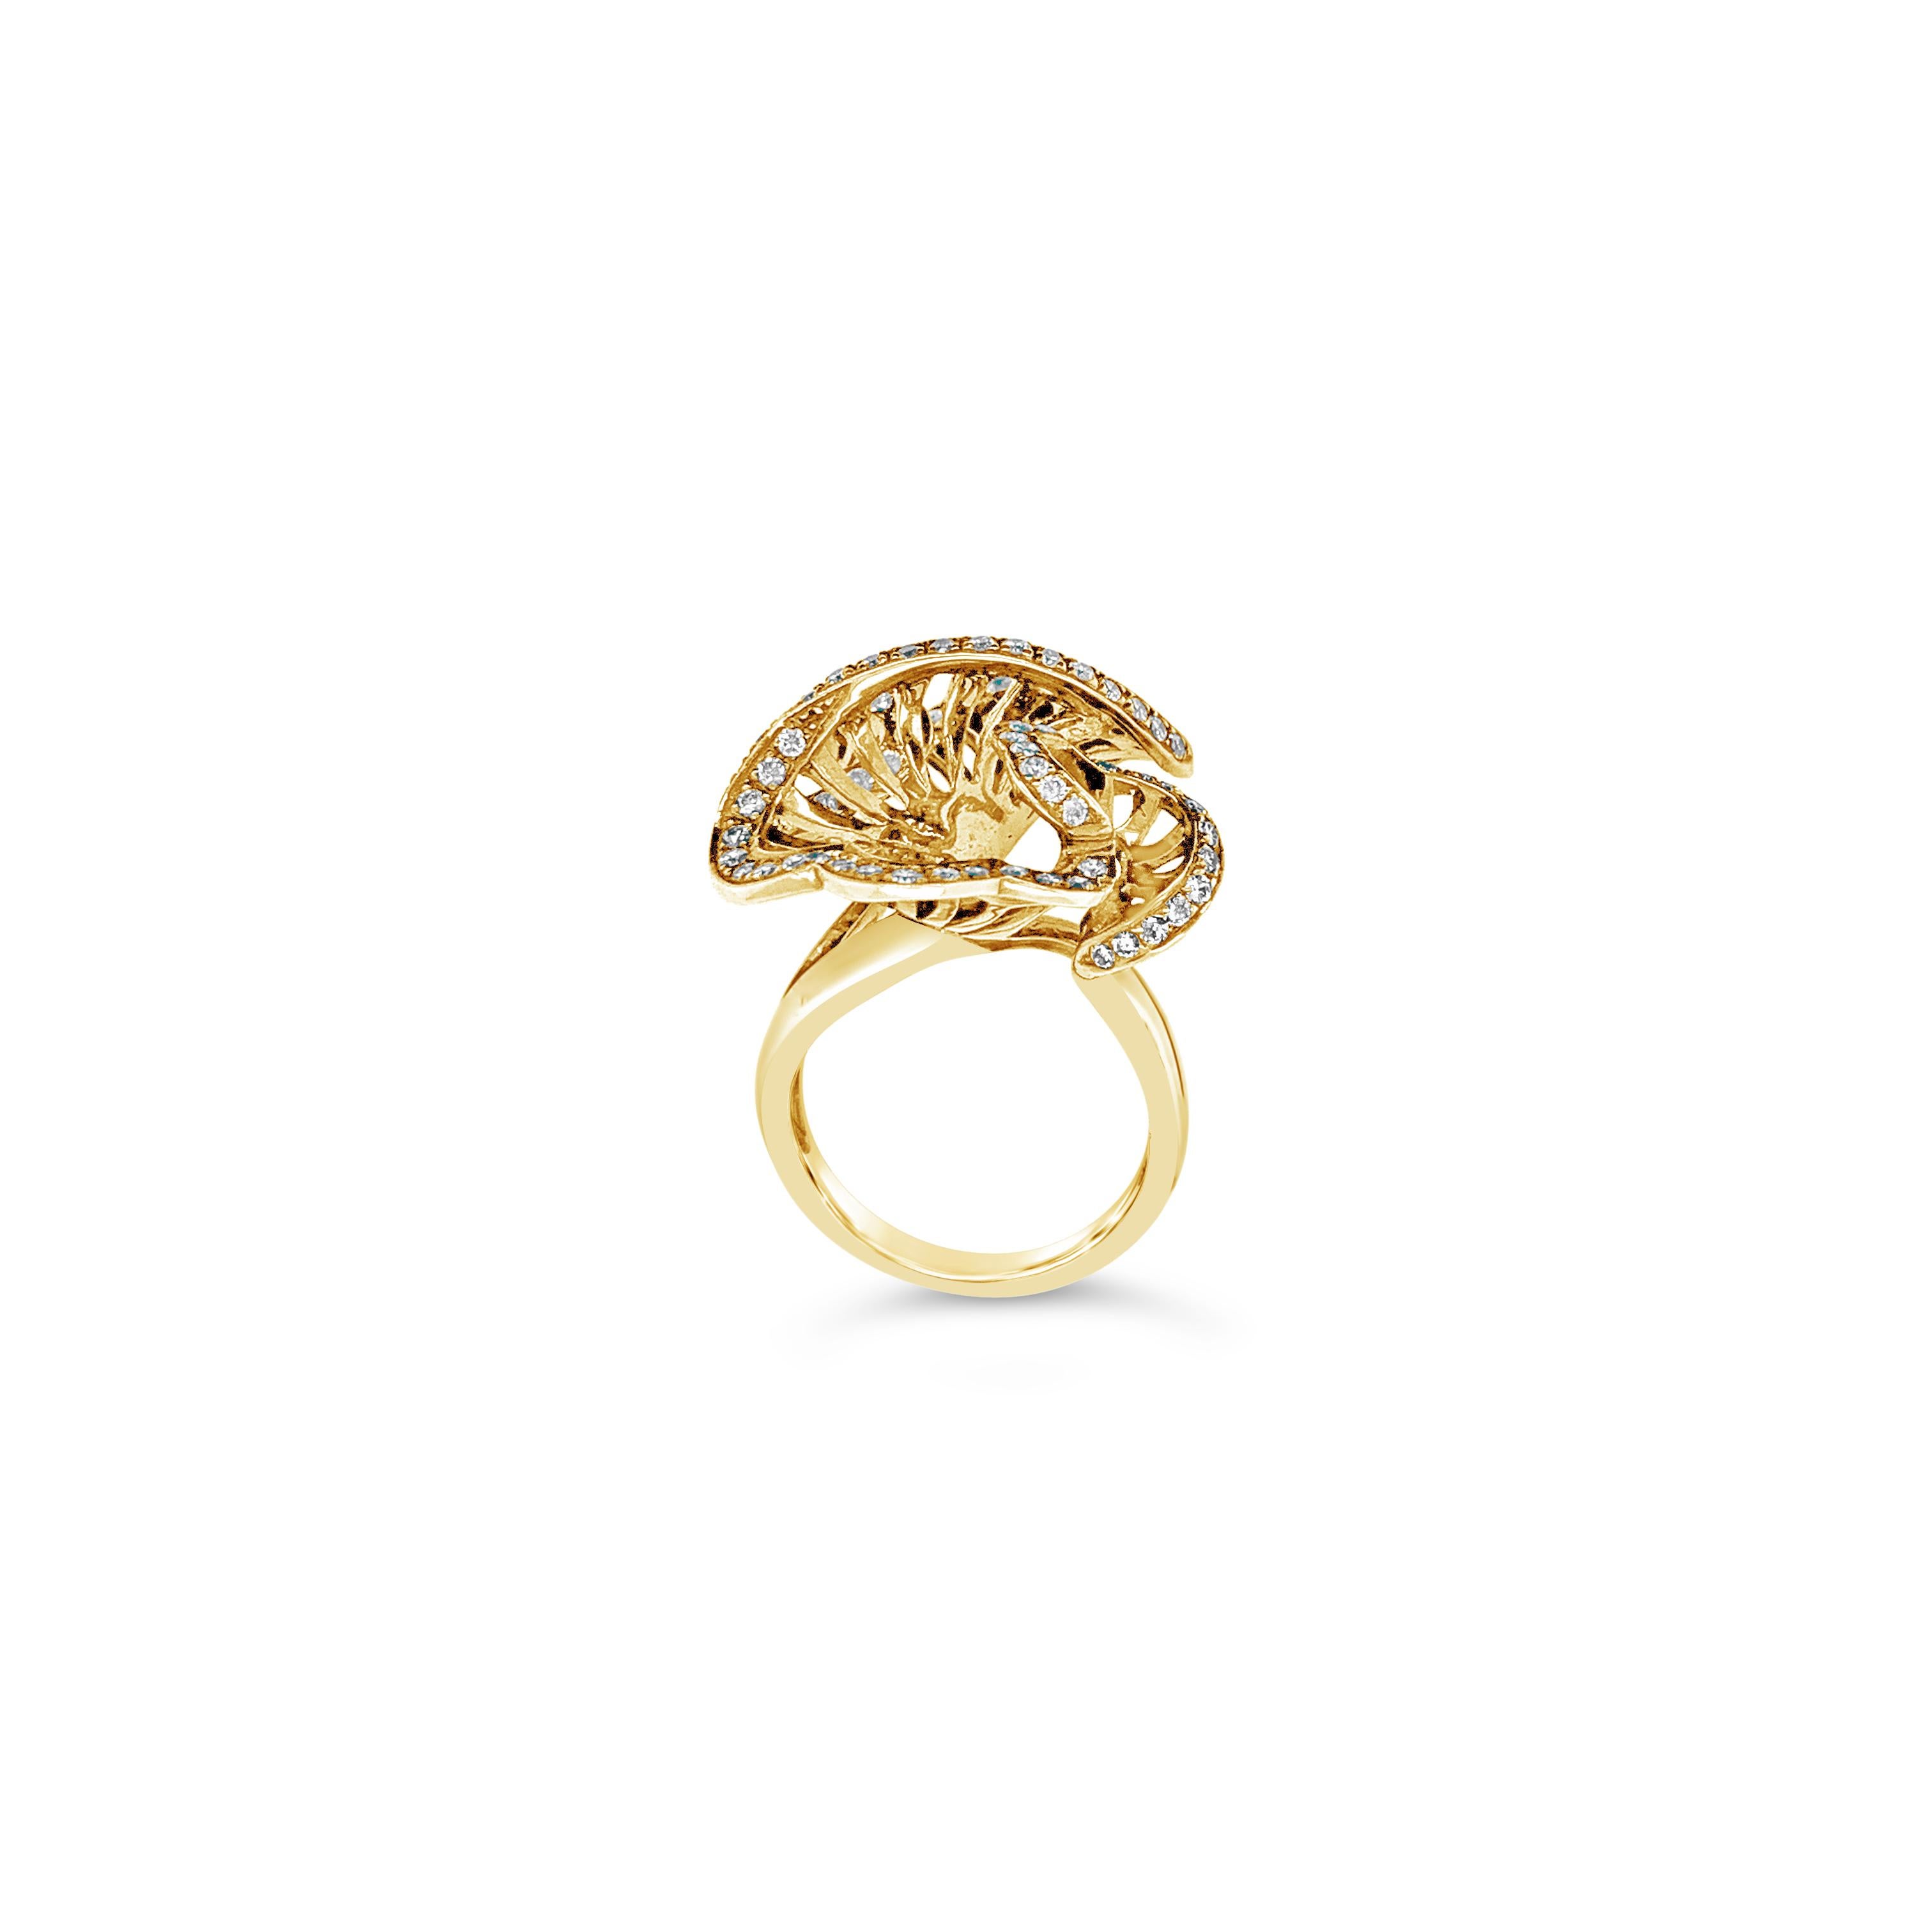 Le Vian Chocolatier® Ring featuring .91 cts. Vanilla Diamonds® set in 14K Chocolate Gold

Diamonds Breakdown:
.91 cts White Diamonds

Gems Breakdown:
None

Ring may or may not be sizable, please feel free to reach out with any questions!

Item comes